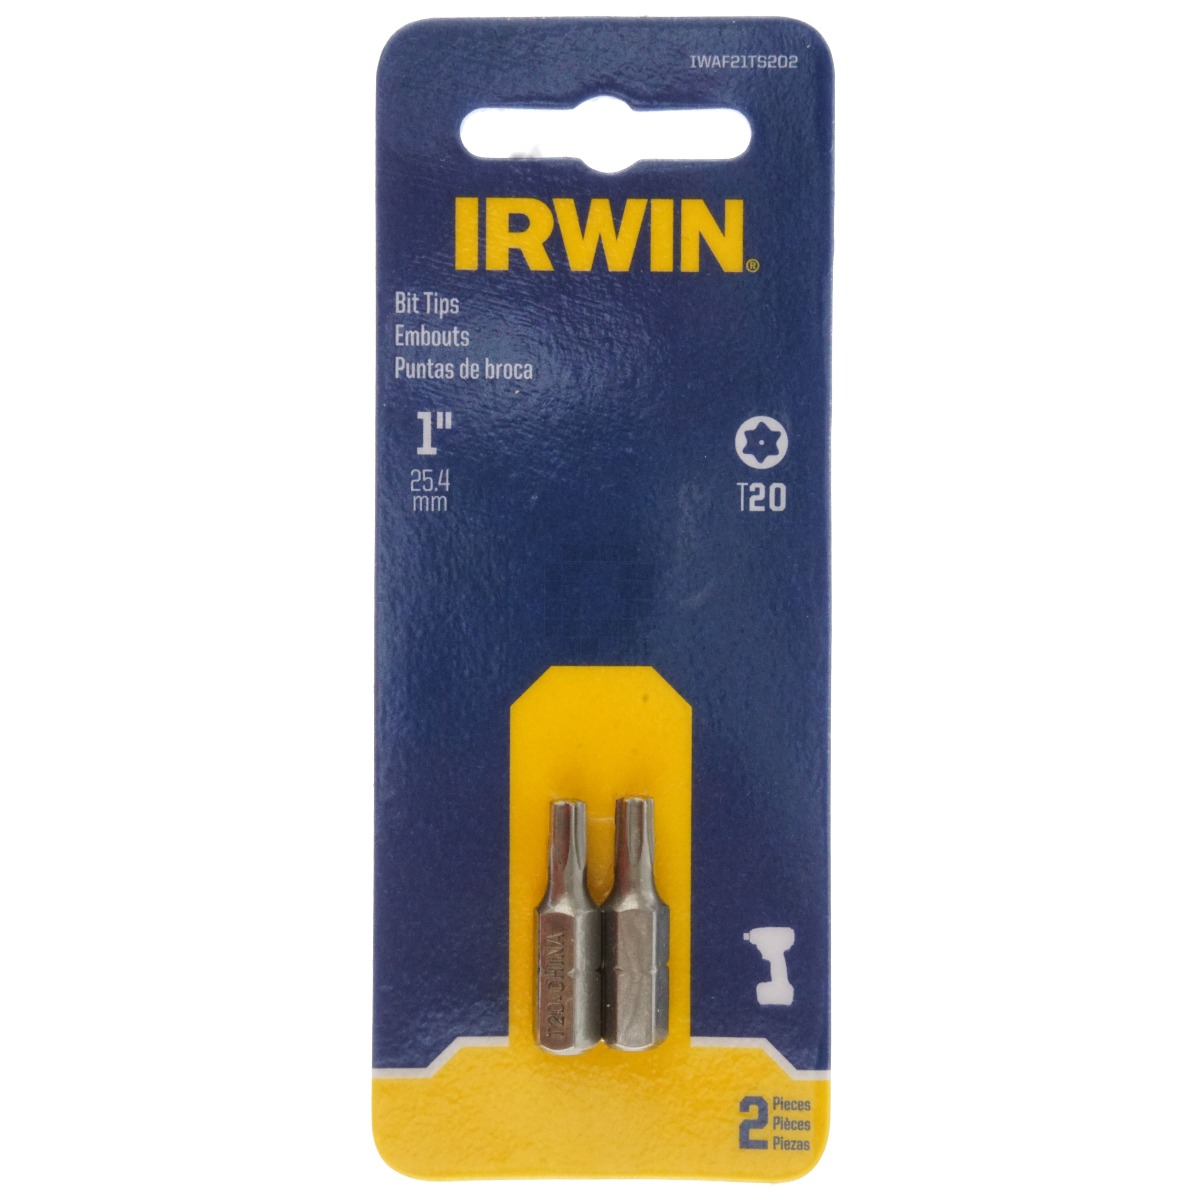 Irwin IWAF21TS202 T20 Tamper Proof Security Insert Bit Tips, 1" Length, 2 Pack